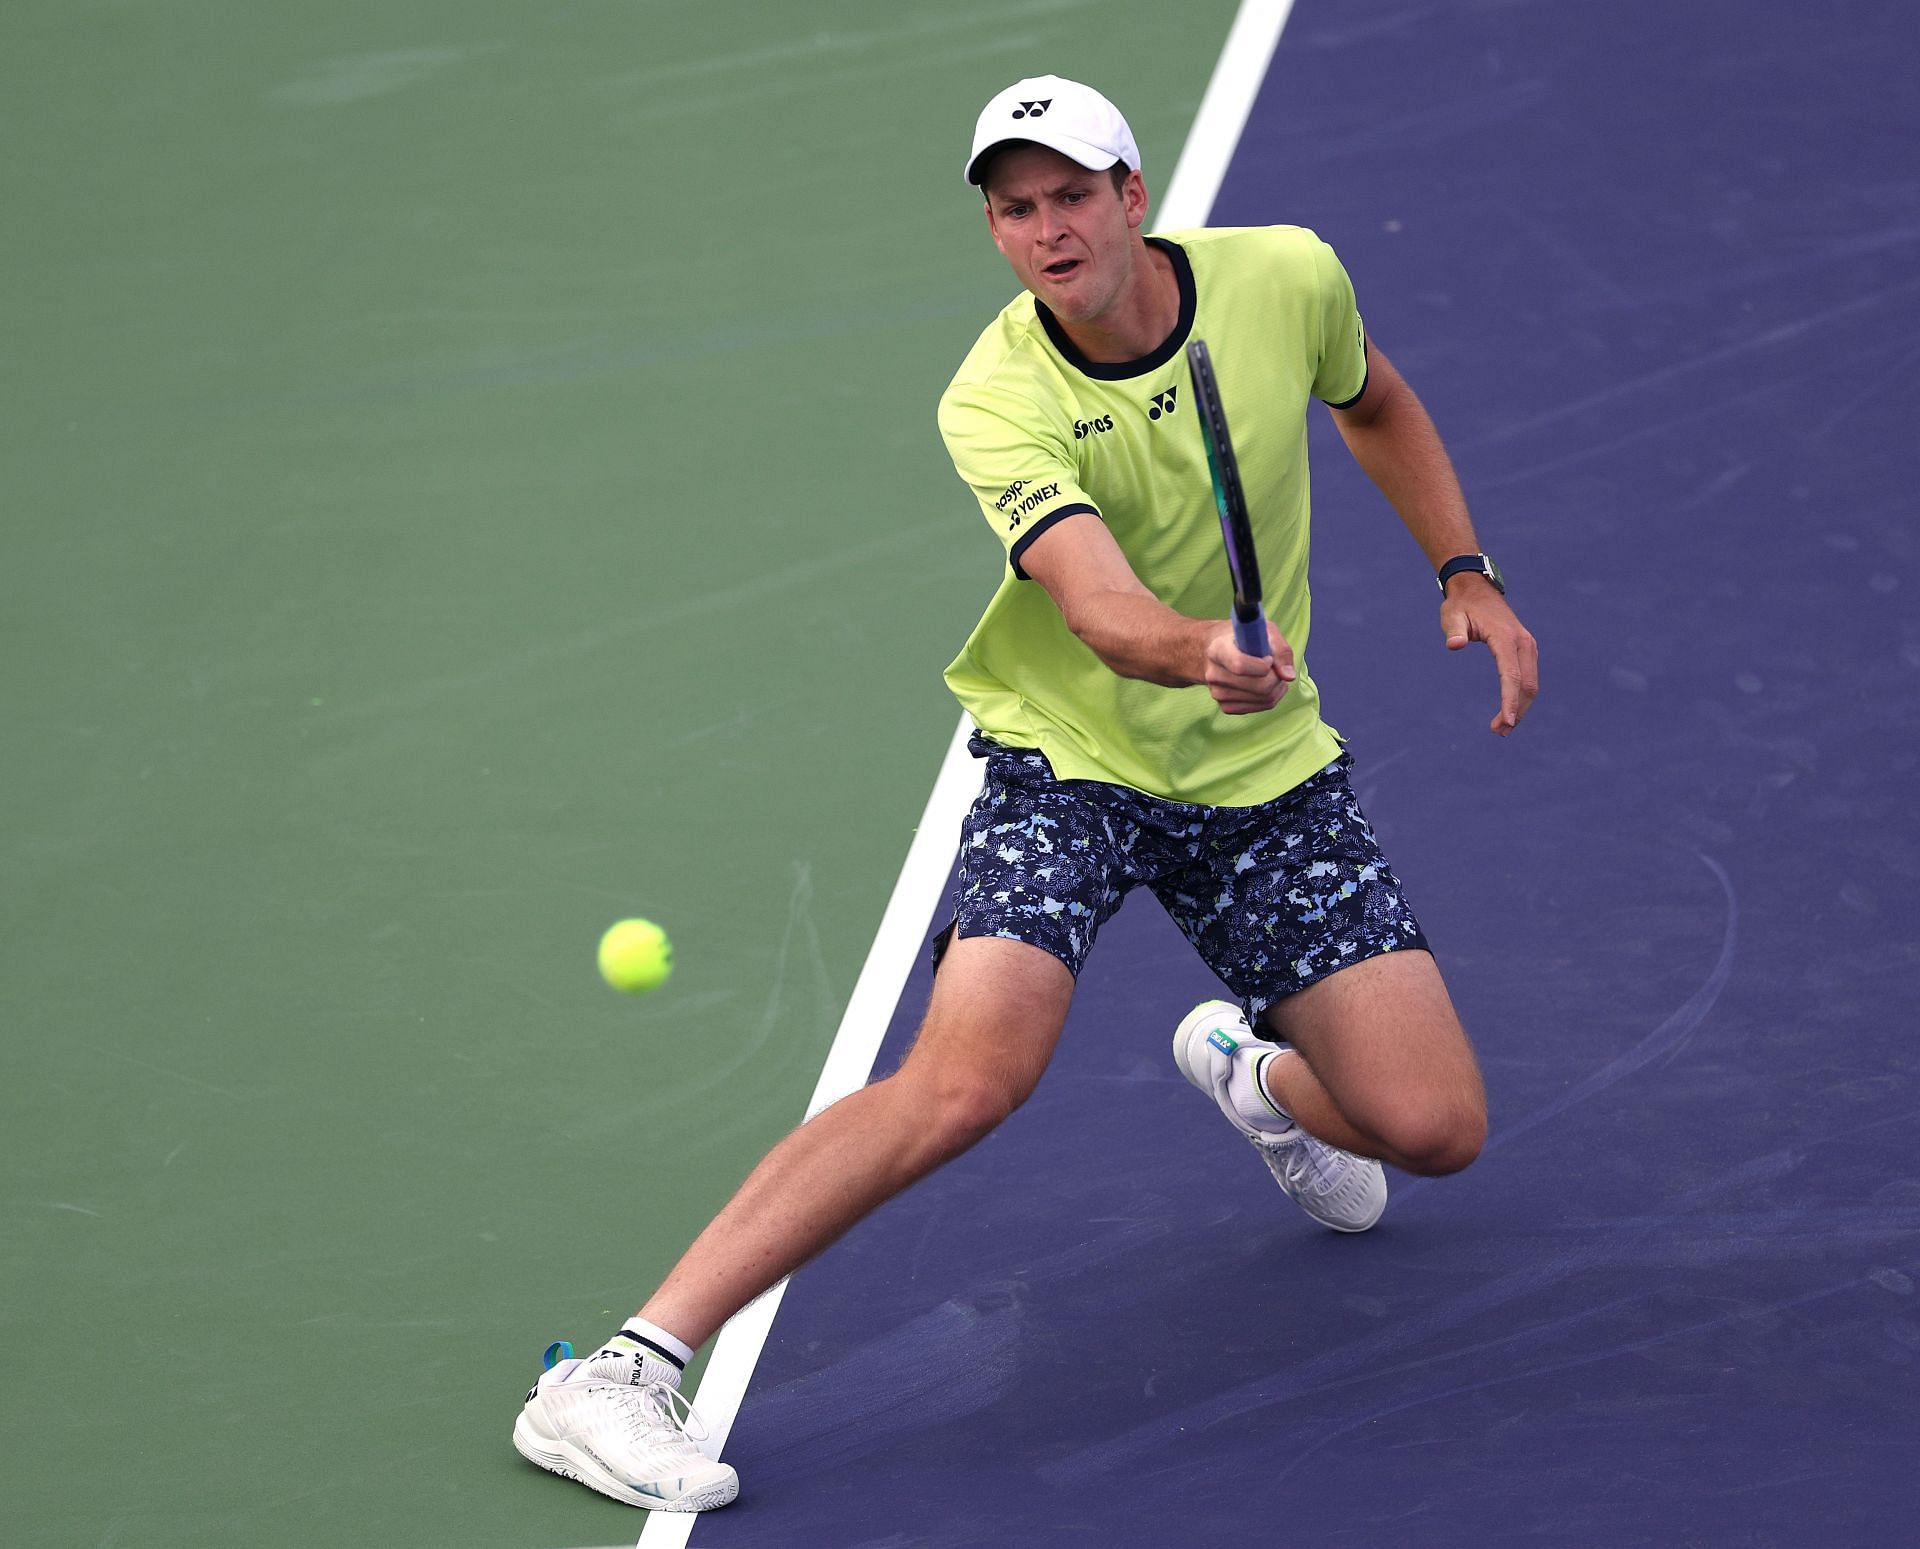 Hurkacz is the defending champion at the Miami Masters